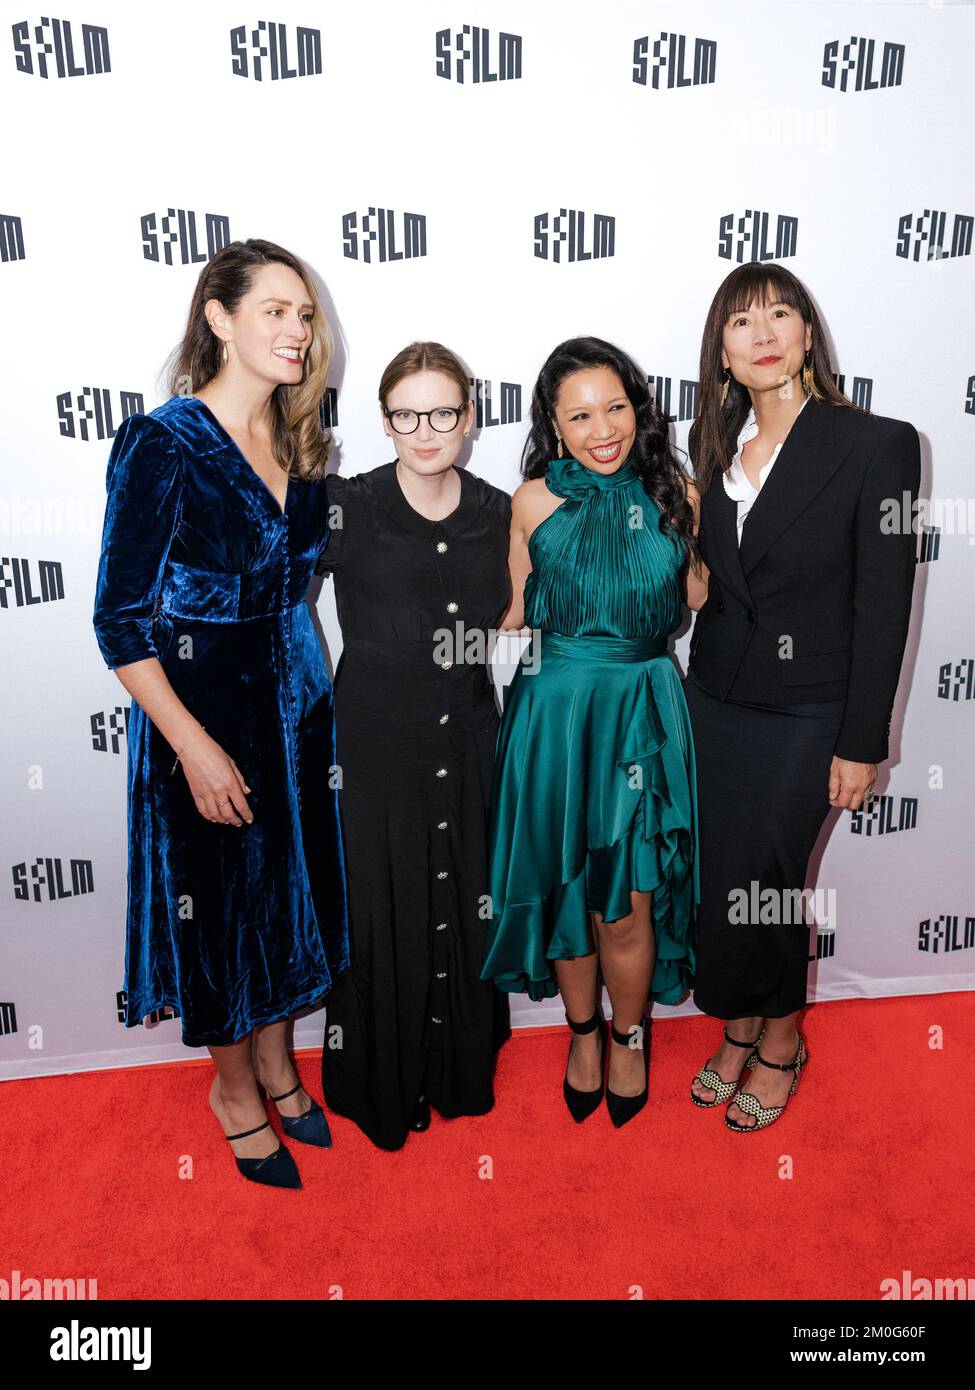 San Francisco, USA. 05th Dec, 2022. Jessie Fairbanks, Sarah Polley, Mariecar Mendoza, and Anne Lai walk the red carpet arrivals at the 2022 SFFILM Award Night held at Yerba Buena Center for the Arts in San Francisco, CA on December 5, 2022. (Photo By Skyler Greene/Sipa USA) Credit: Sipa USA/Alamy Live News Stock Photo